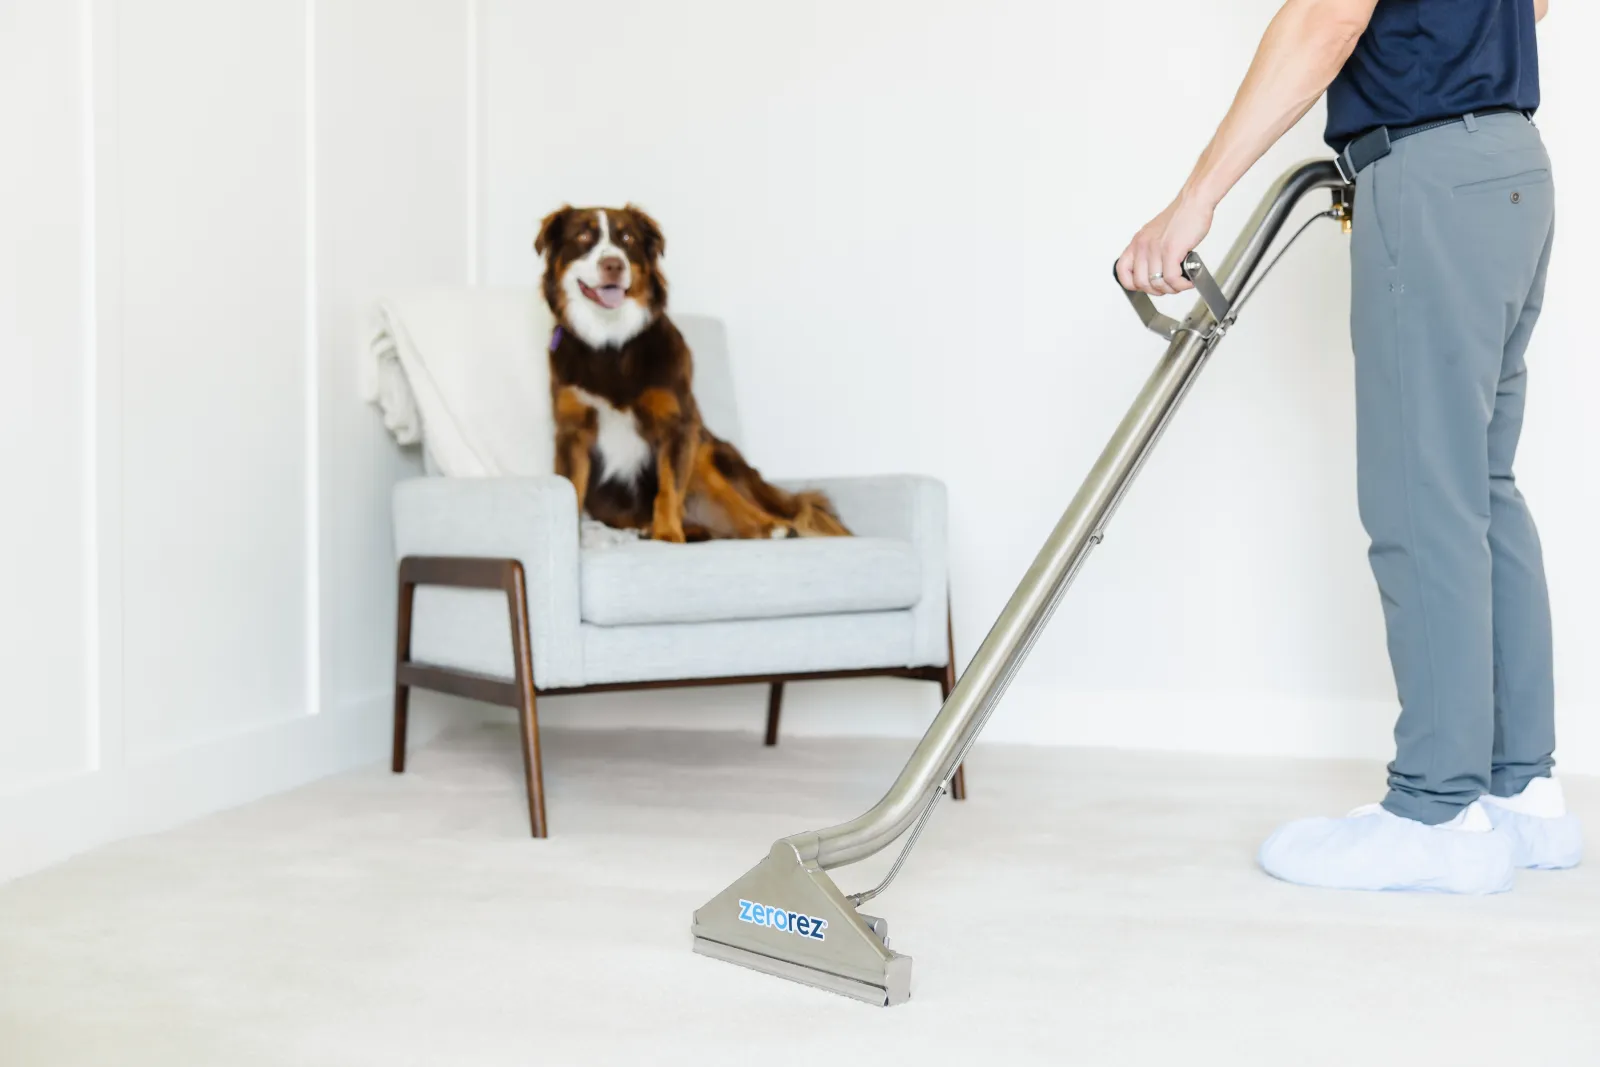 Zerorez technician using a Zr Wand to clean up a pet accident on a white carpet good for dogs pets, while the brown and white dog sits on a white upholstered chair in the corner watching the technician